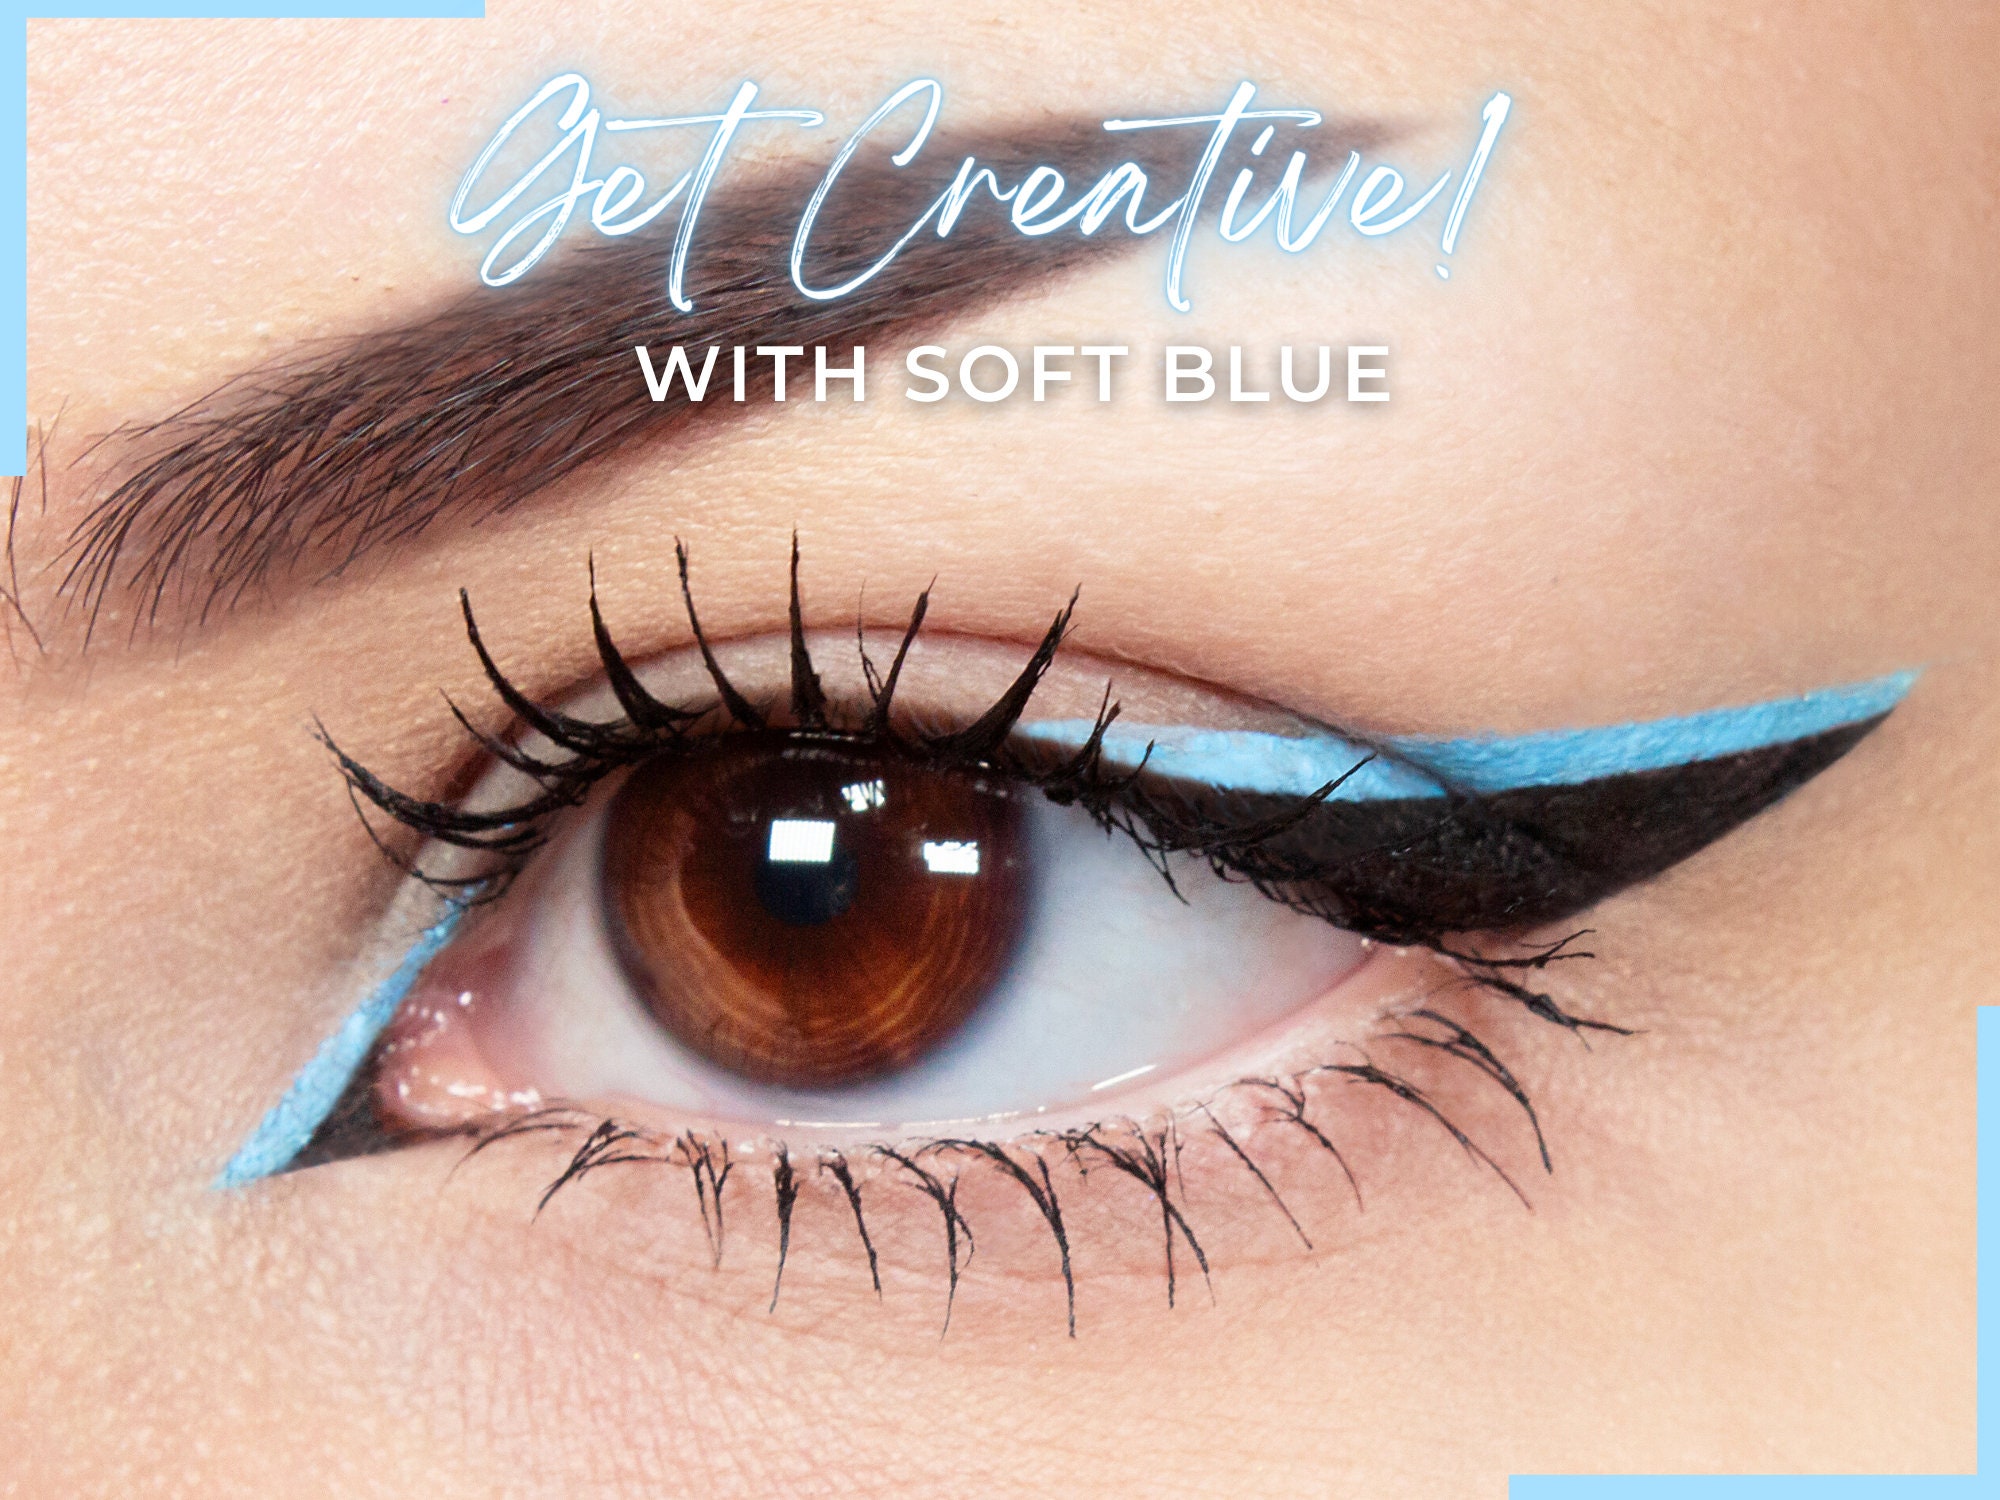 Water-Activated Cake Eyeliner  Rich, Long Wear, and Matte